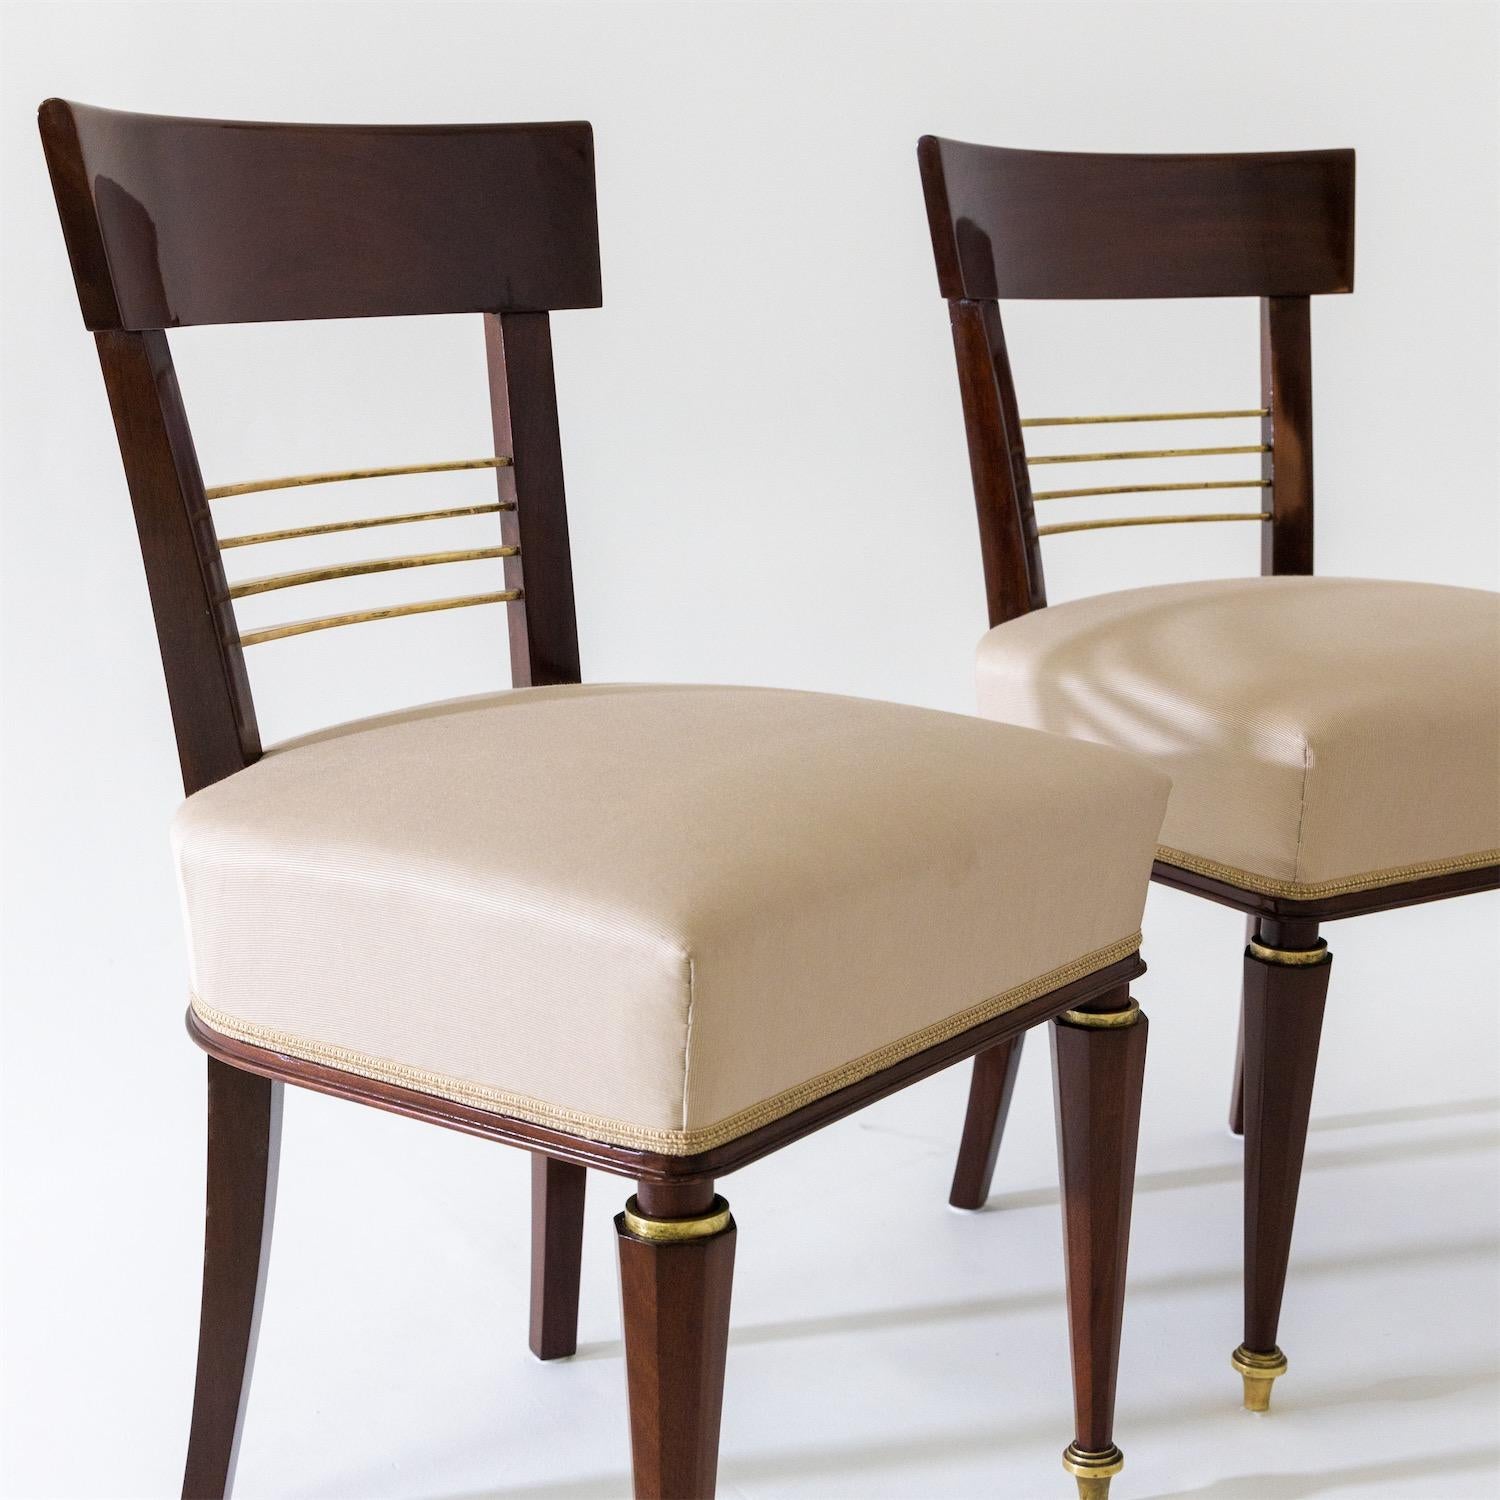 Set of Six Dining Room Chairs, Mid-19th Century 2